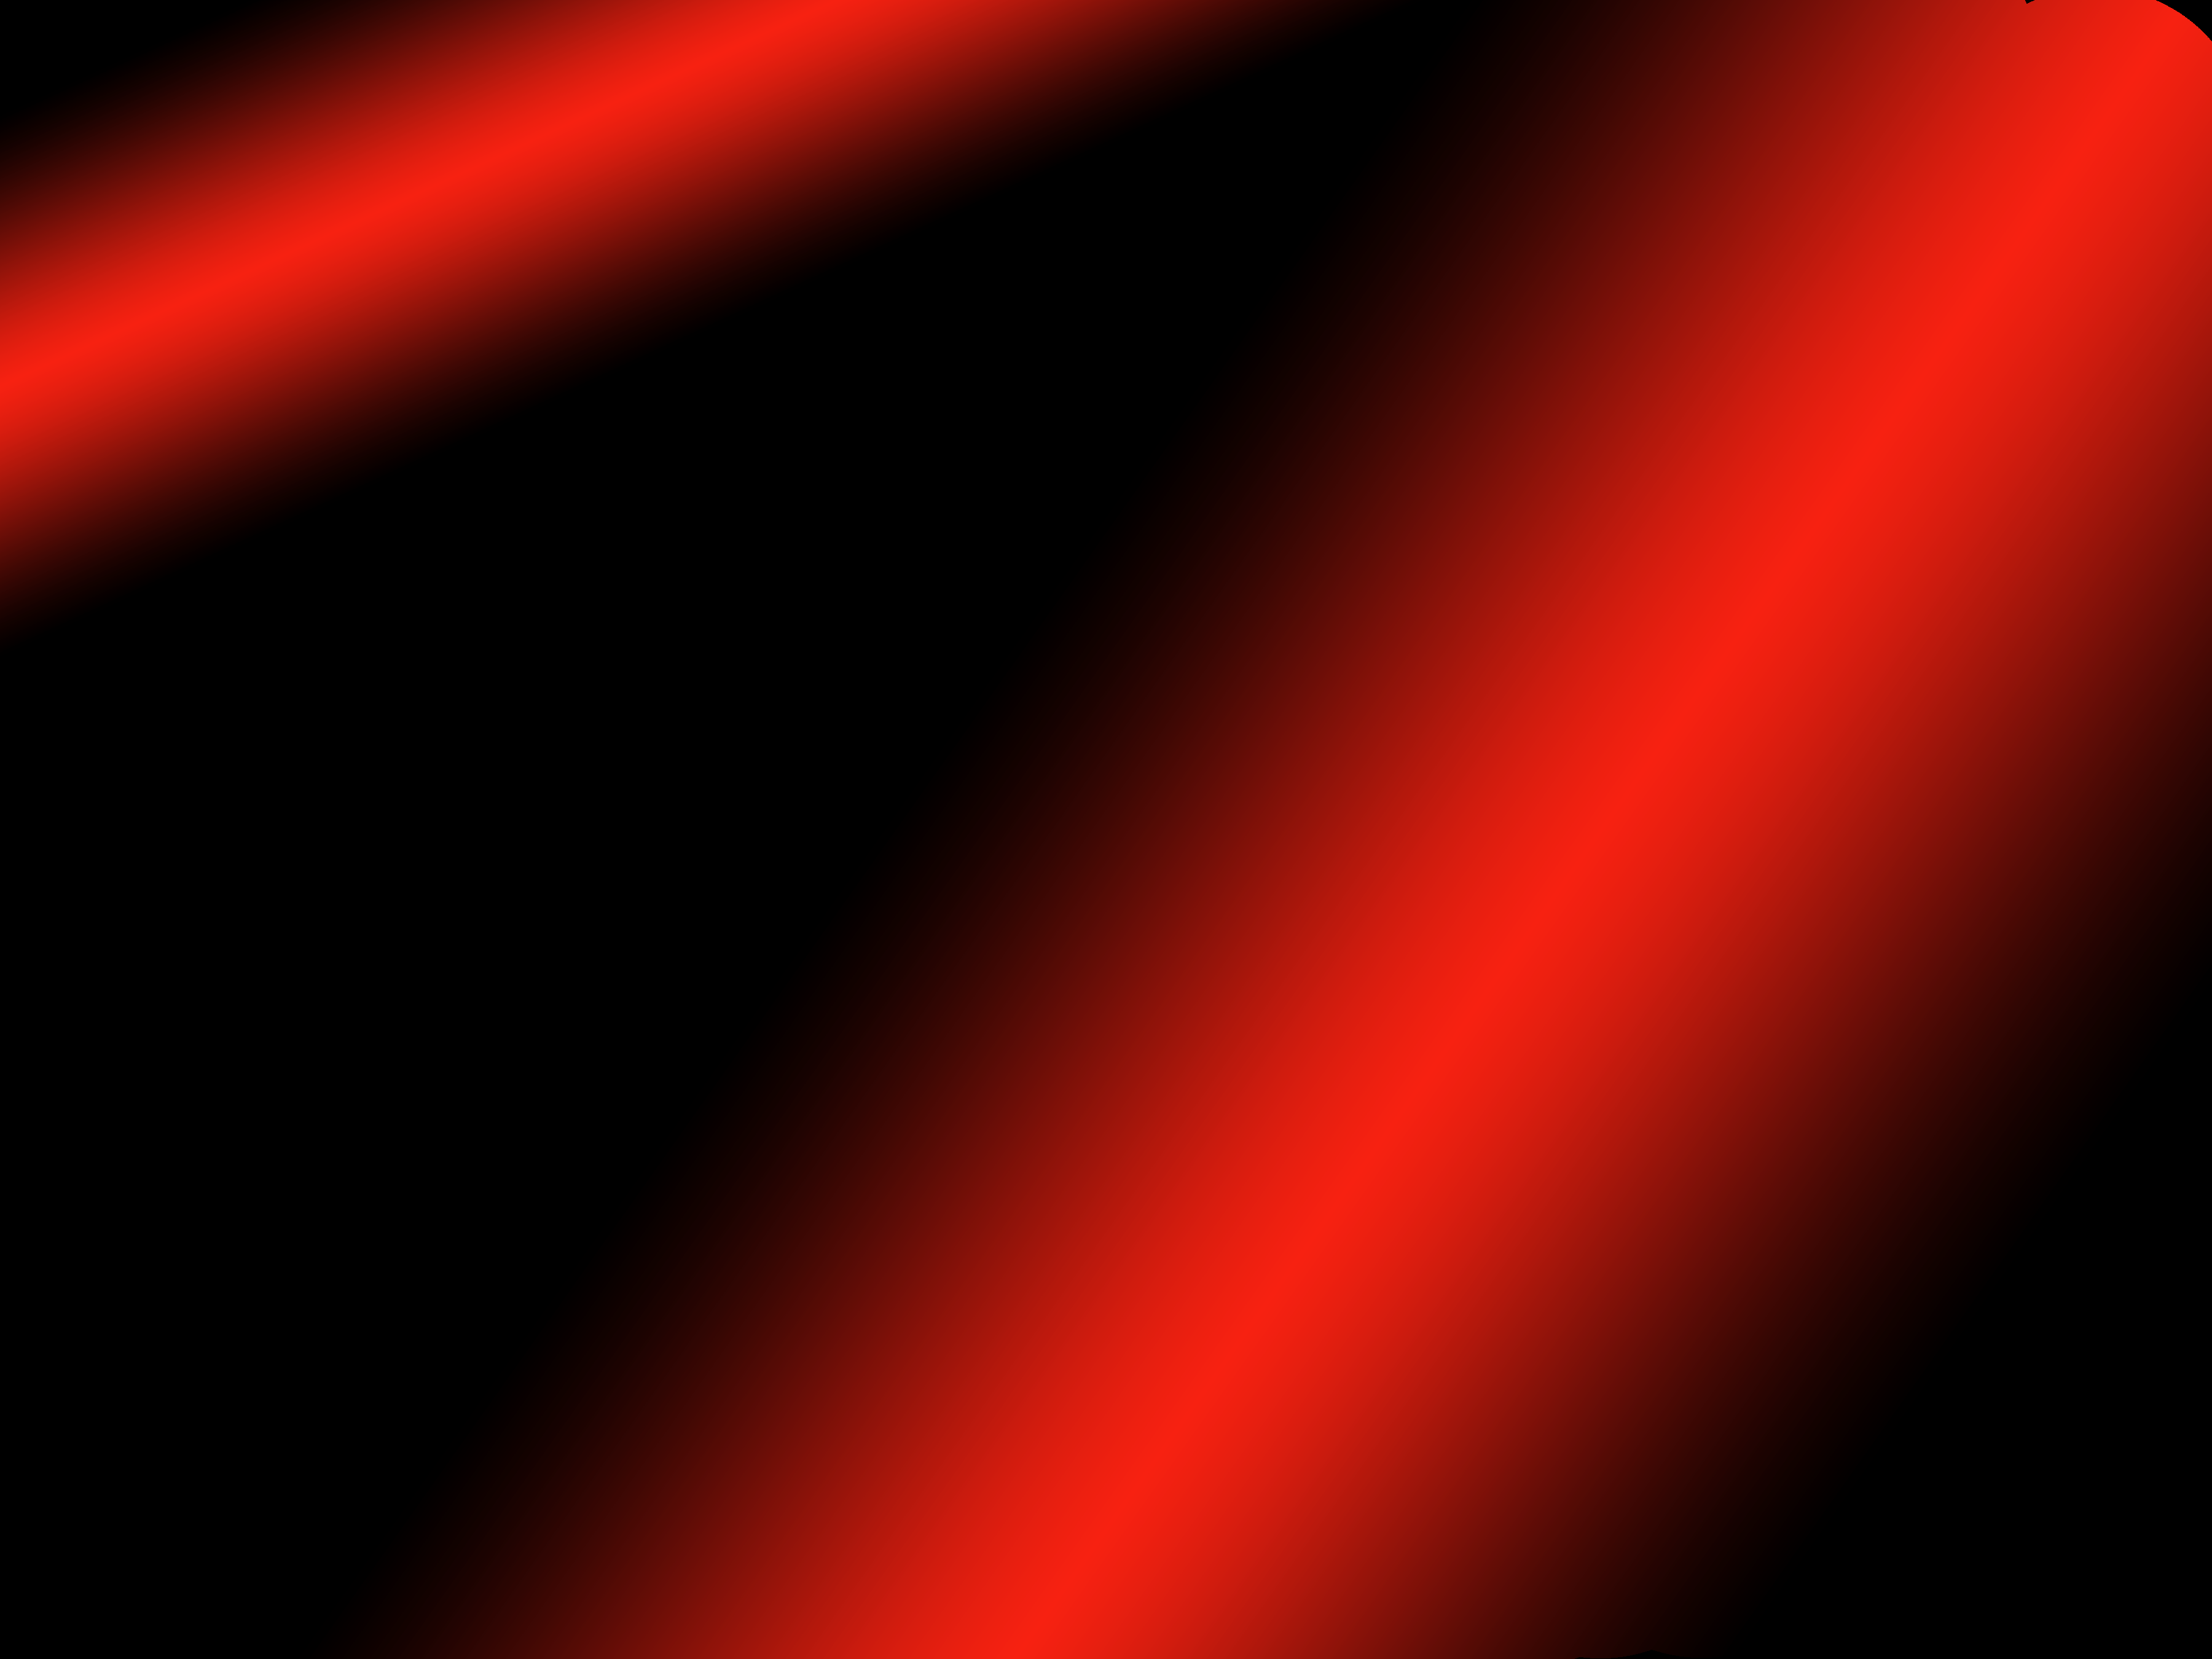 Red neon glow is an 816k png 24 bit image at 3600×2700 pixels 300